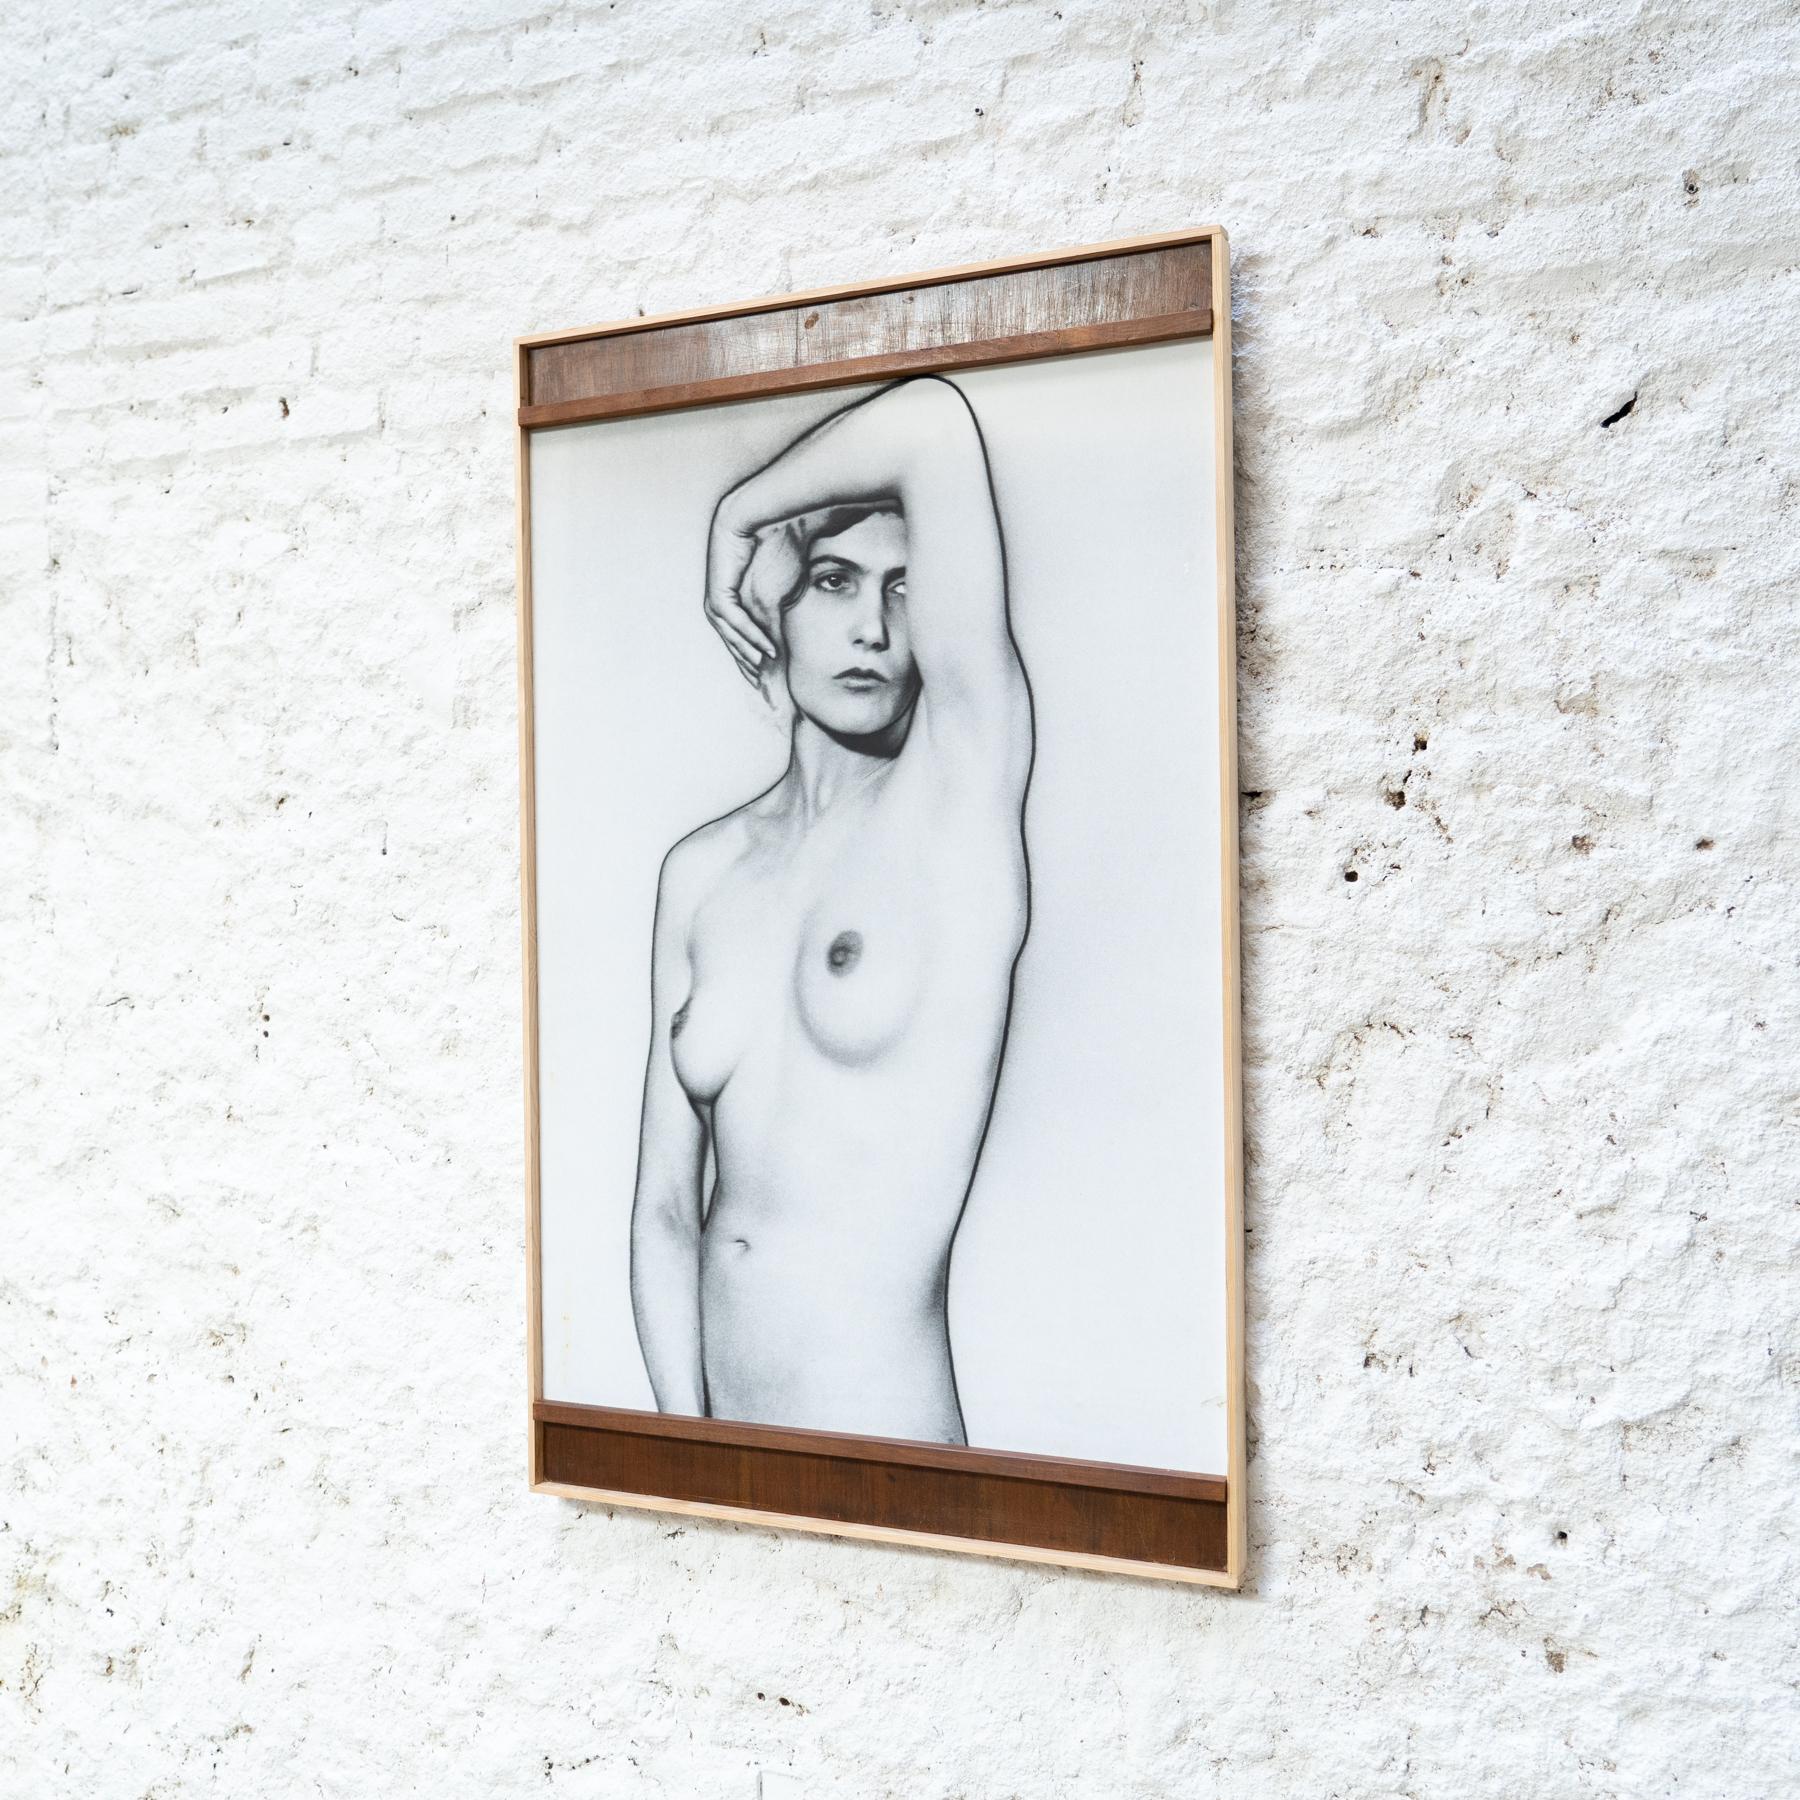 French Big Size Photographic Print Framed Composition by Man Ray “Solarised Nude” For Sale